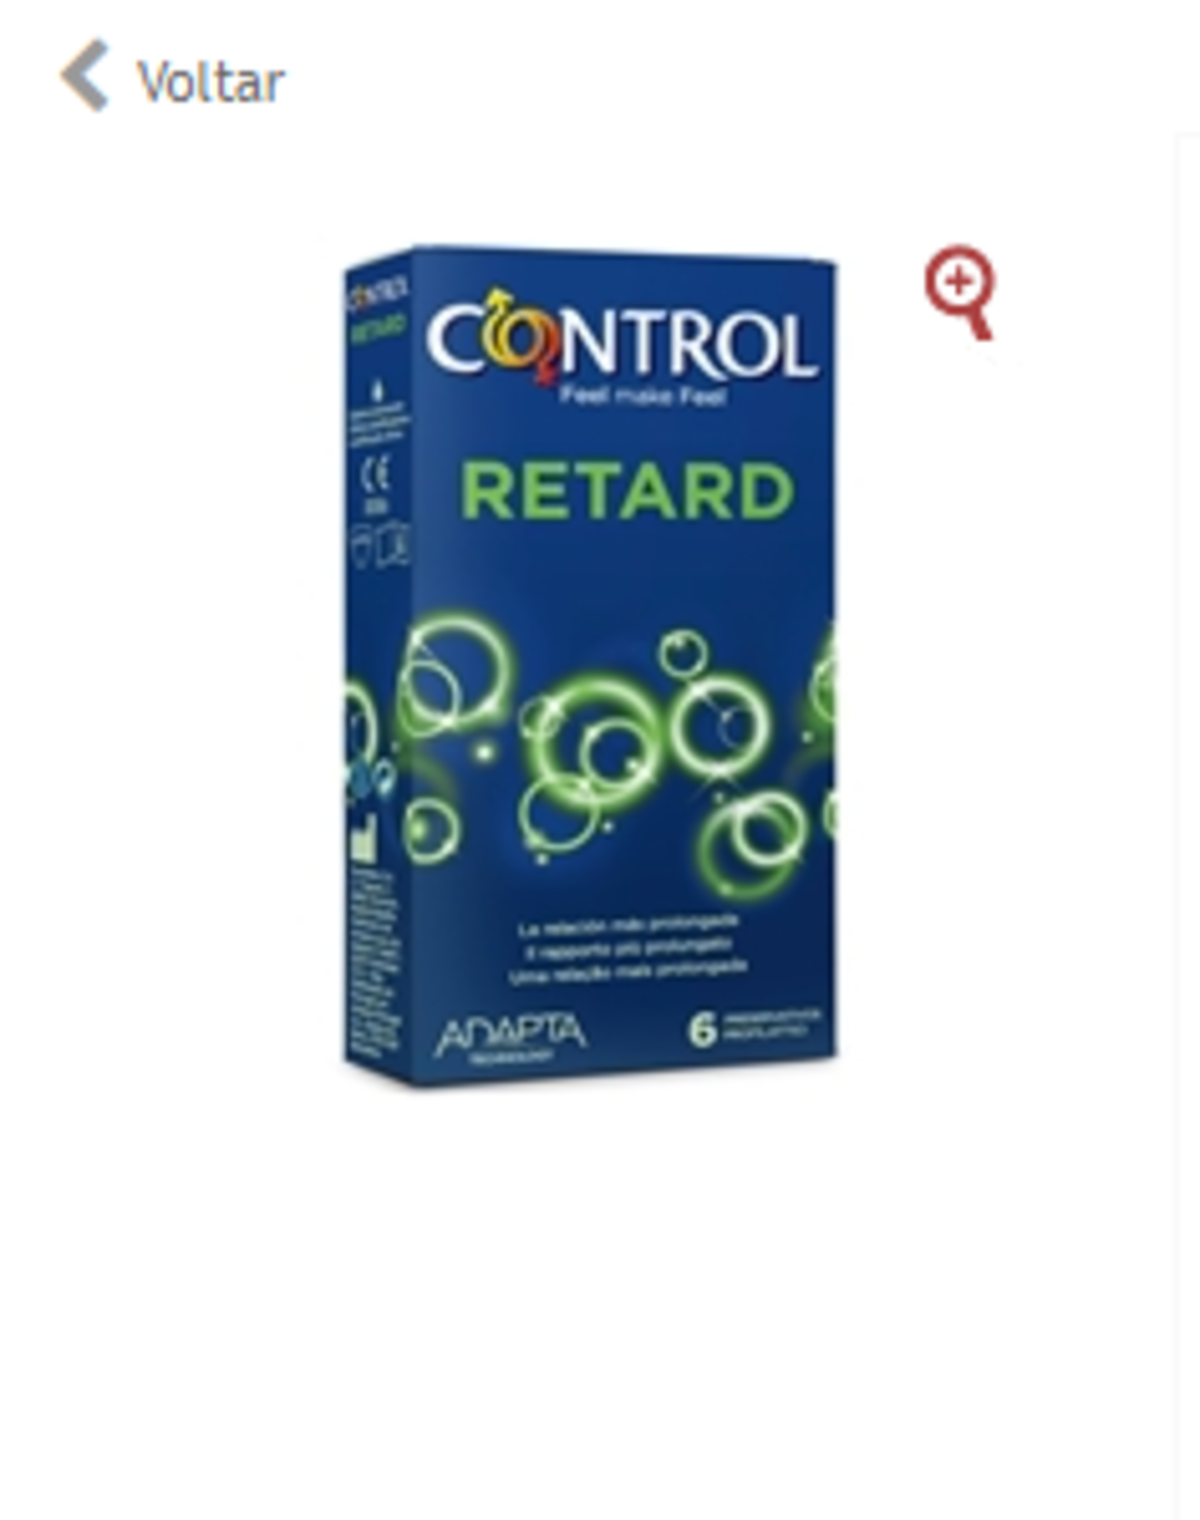 they are making special condoms now. this is real btw RetekProductCatalogMegastoreContinenteOnline_Continente)&amp;refiner=%23%2F%3Fpl%3D80%26page%3D13.. so they are condoms